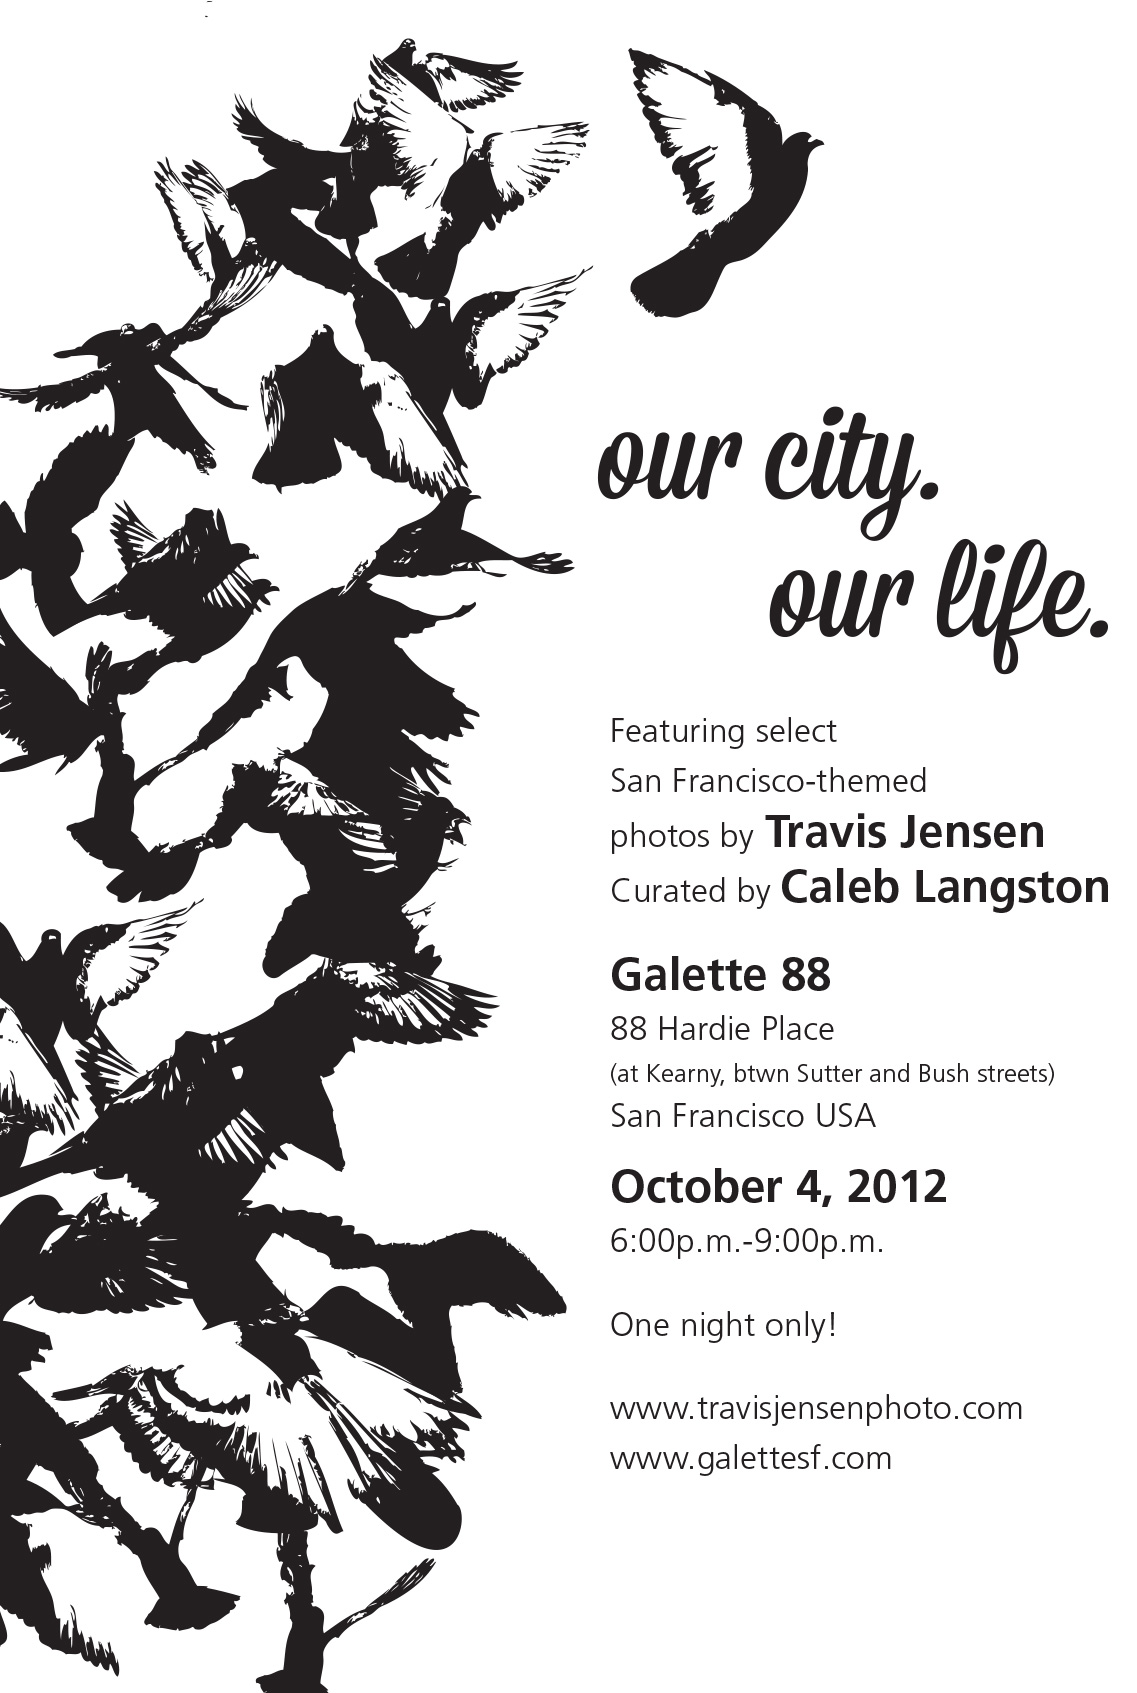 “Our City. Our Life” Photo Exhibition from Street Photographer Travis Jensen @ Galette 88, Thursday (10/4) from 6-9PM